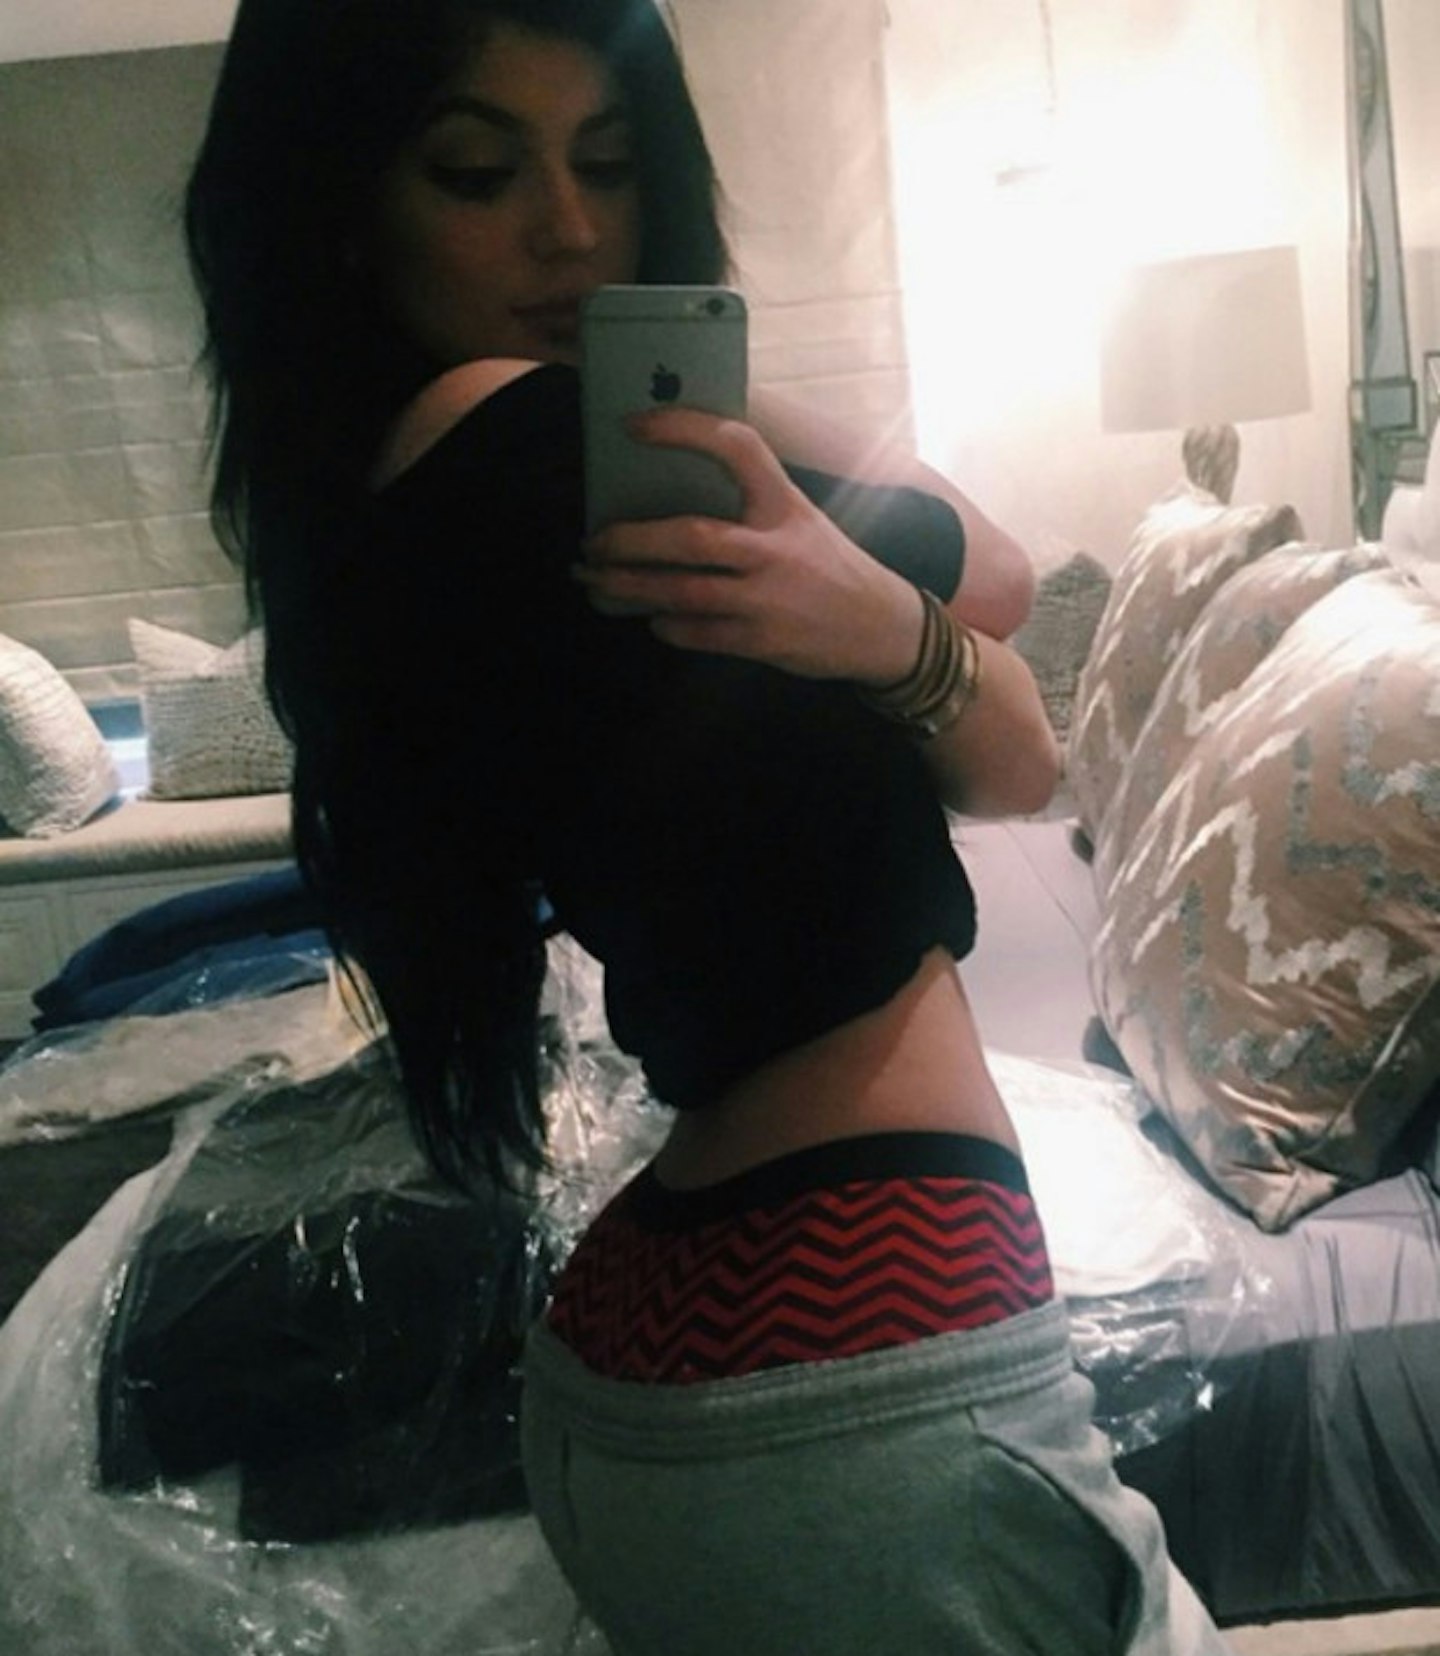 Kylie Jenner Snaps a Butt Selfie in Her Home Gym: See Photo!